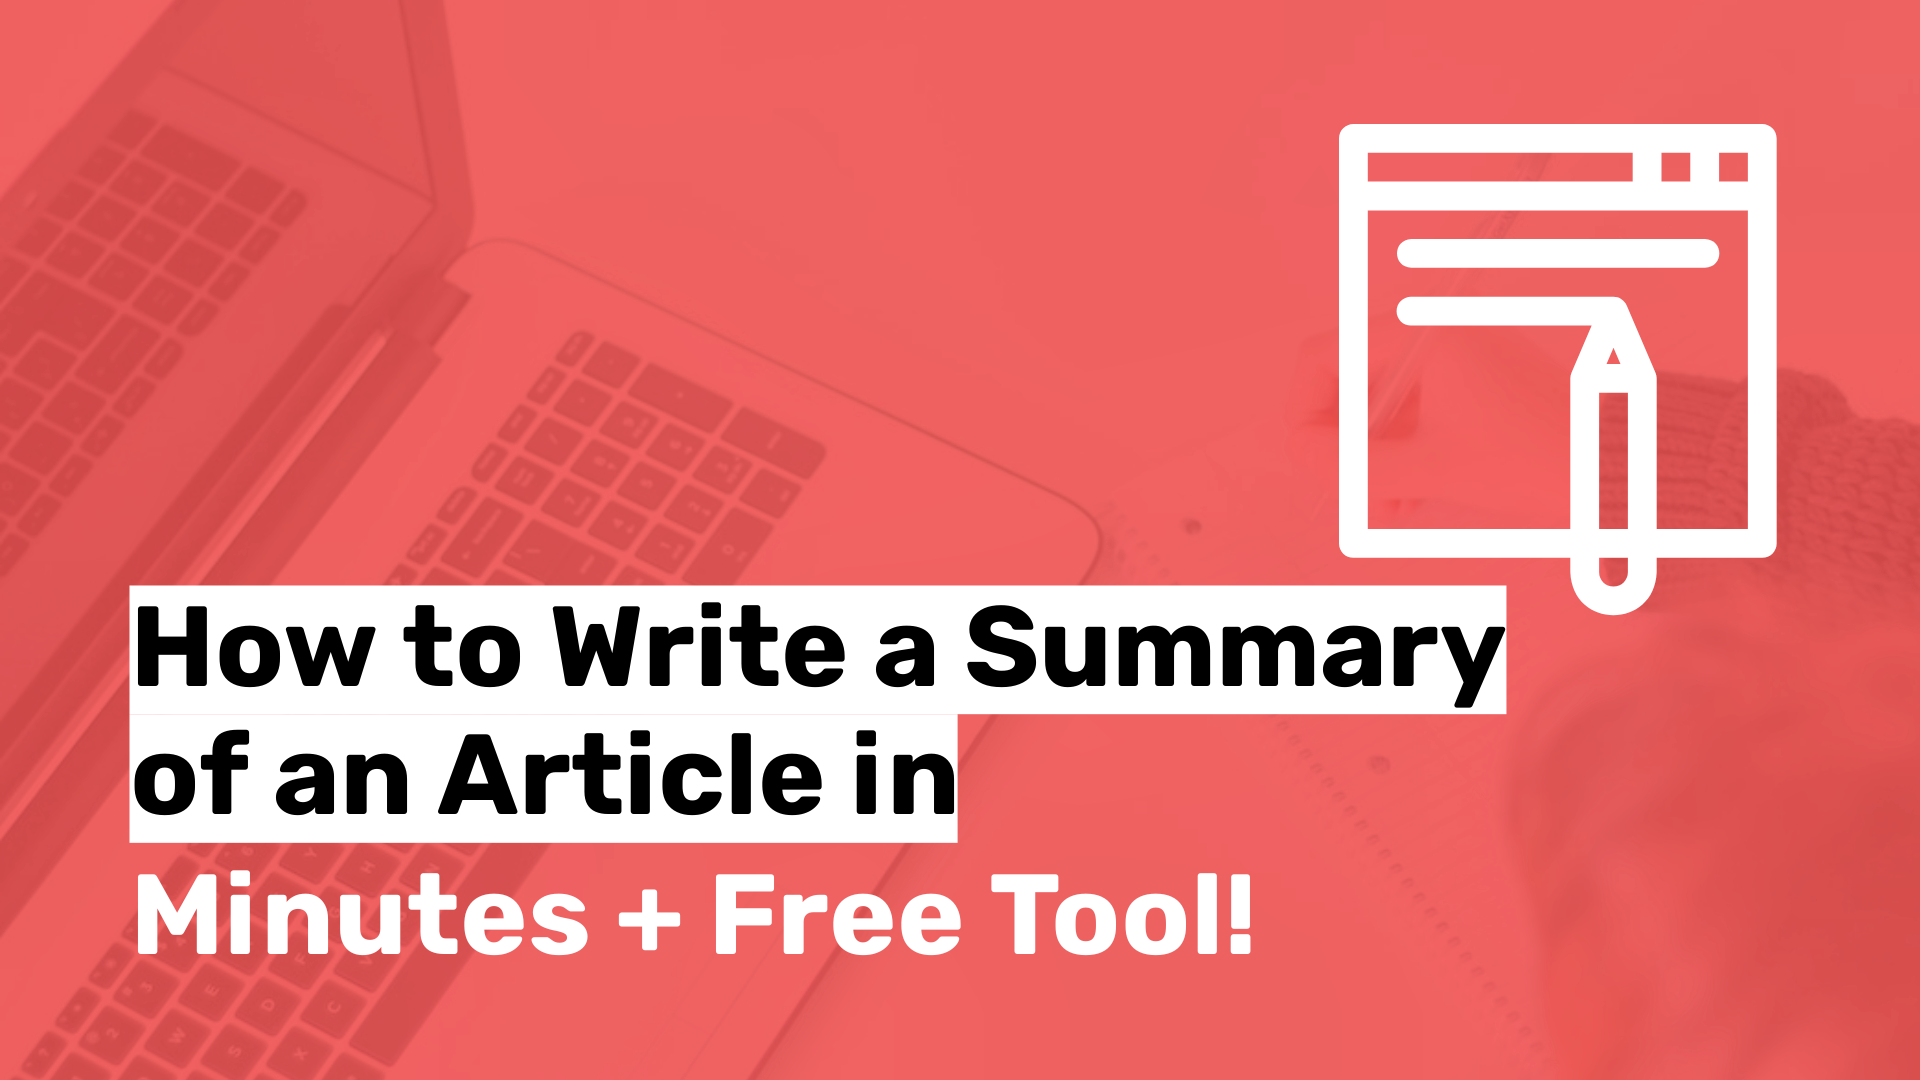 How to Write a Summary of an Article in Minutes + Free Tool!